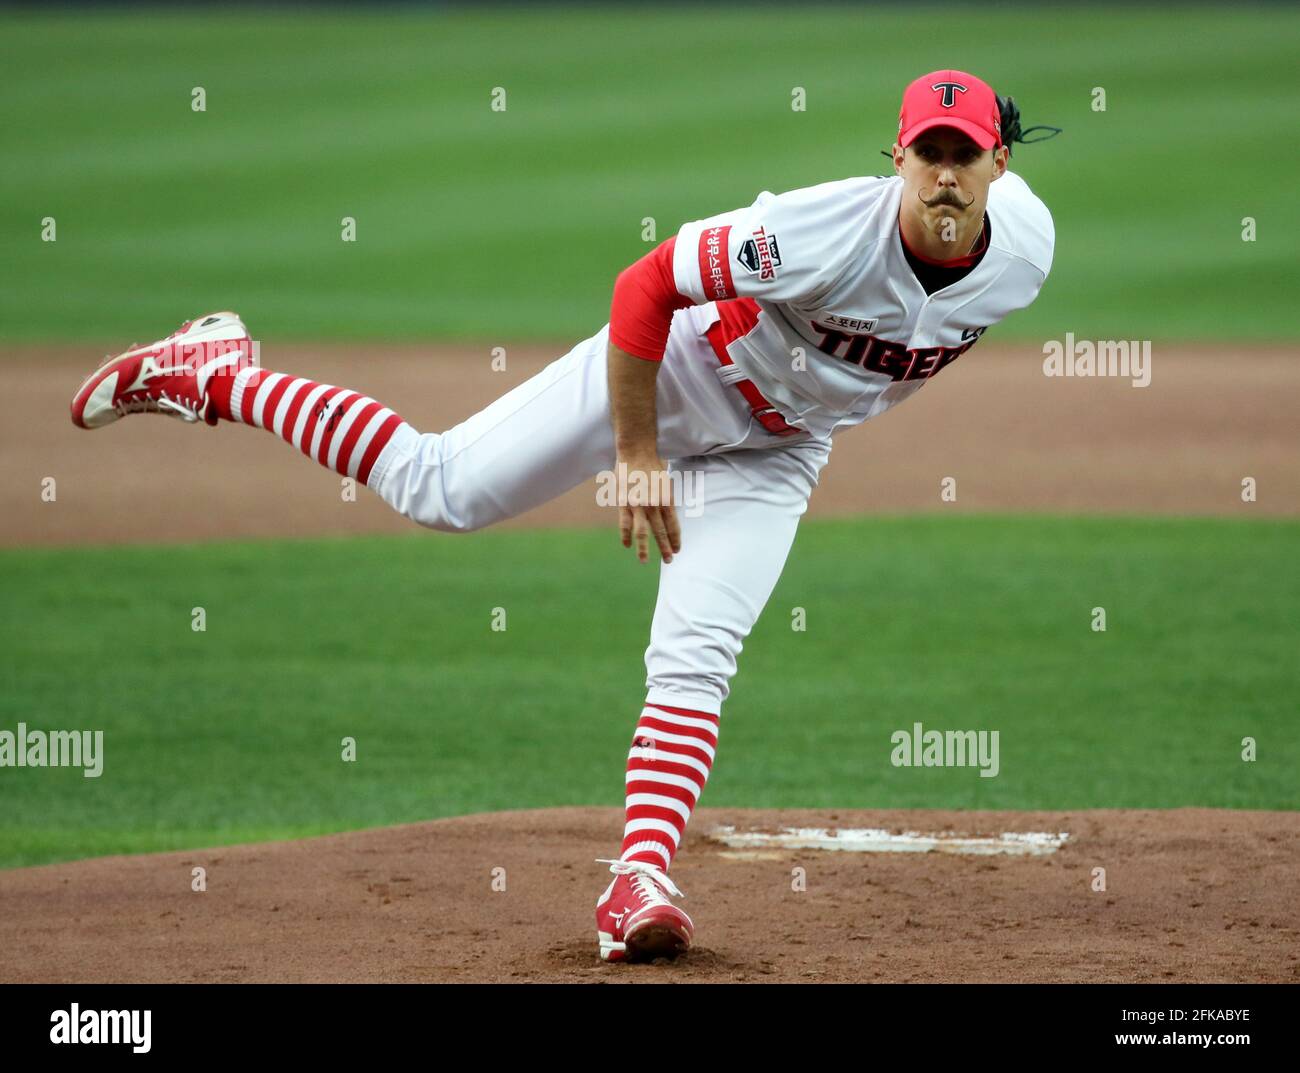 21st June, 2021. Hanwha Eagles' Ryan Carpenter Ryan Carpenter of the Hanwha  Eagles throws a pitch against the SSG Landers during a Korea Baseball  Organization match held at Eagles Park in Daejeon